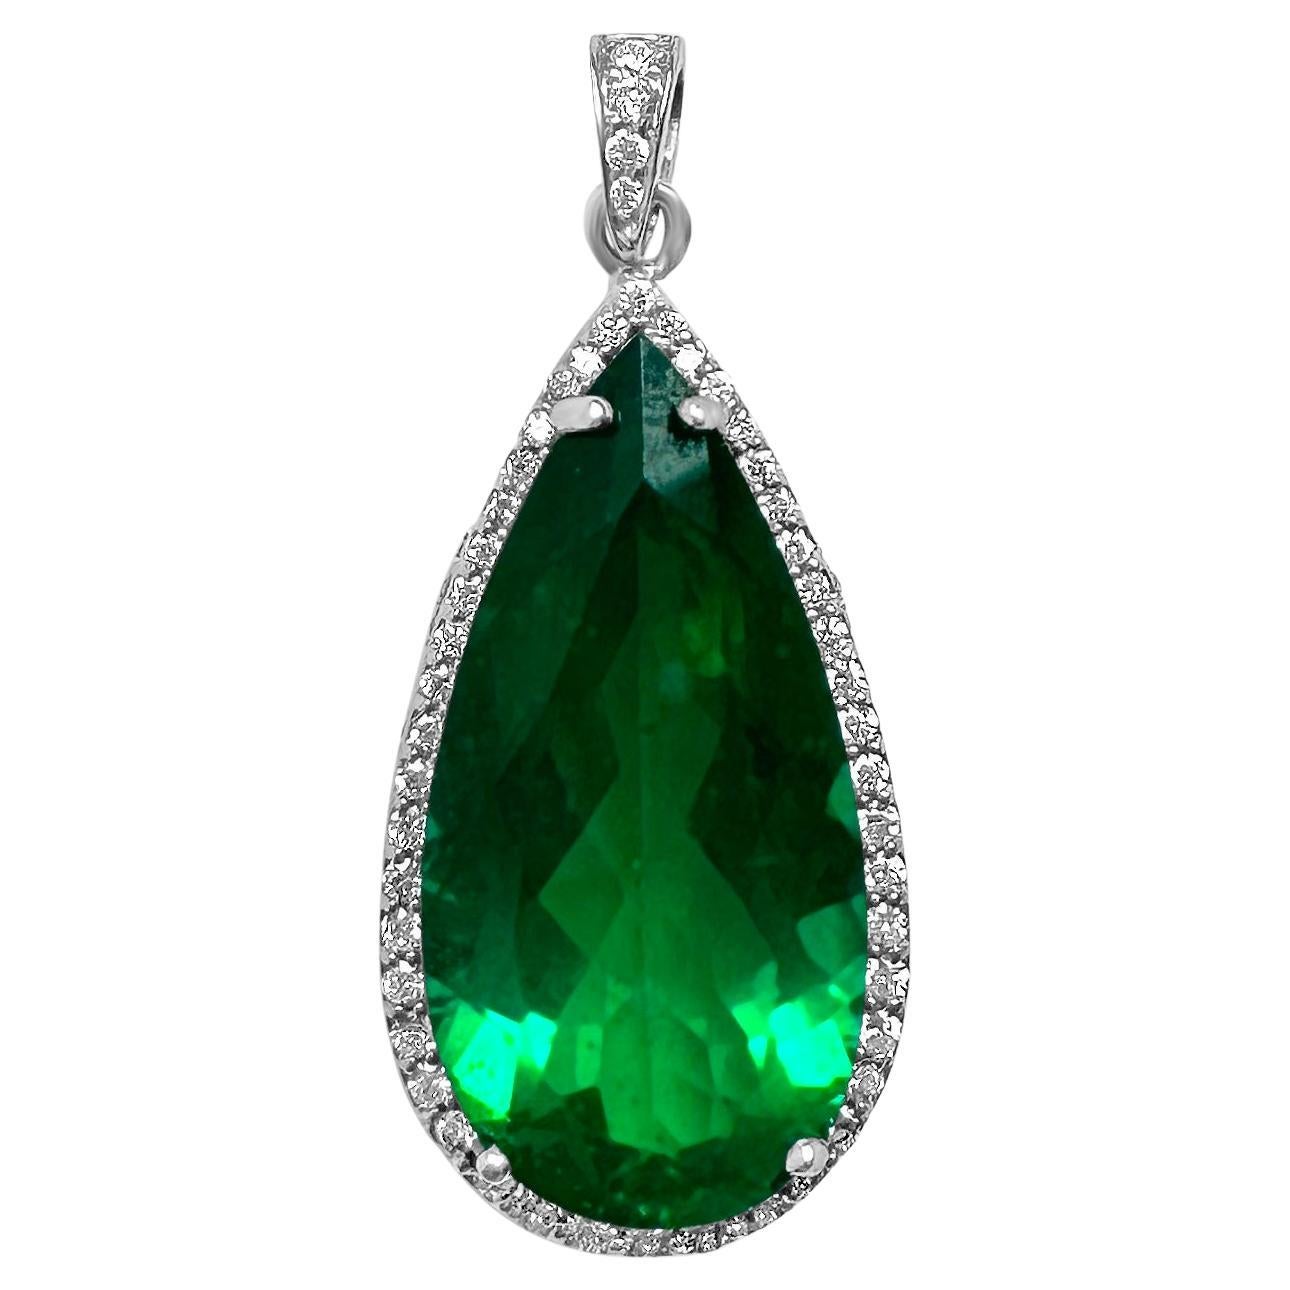 Pear Shaped Beryl Emerald 14K White Gold Pendant with Round Diamonds  by Manart For Sale